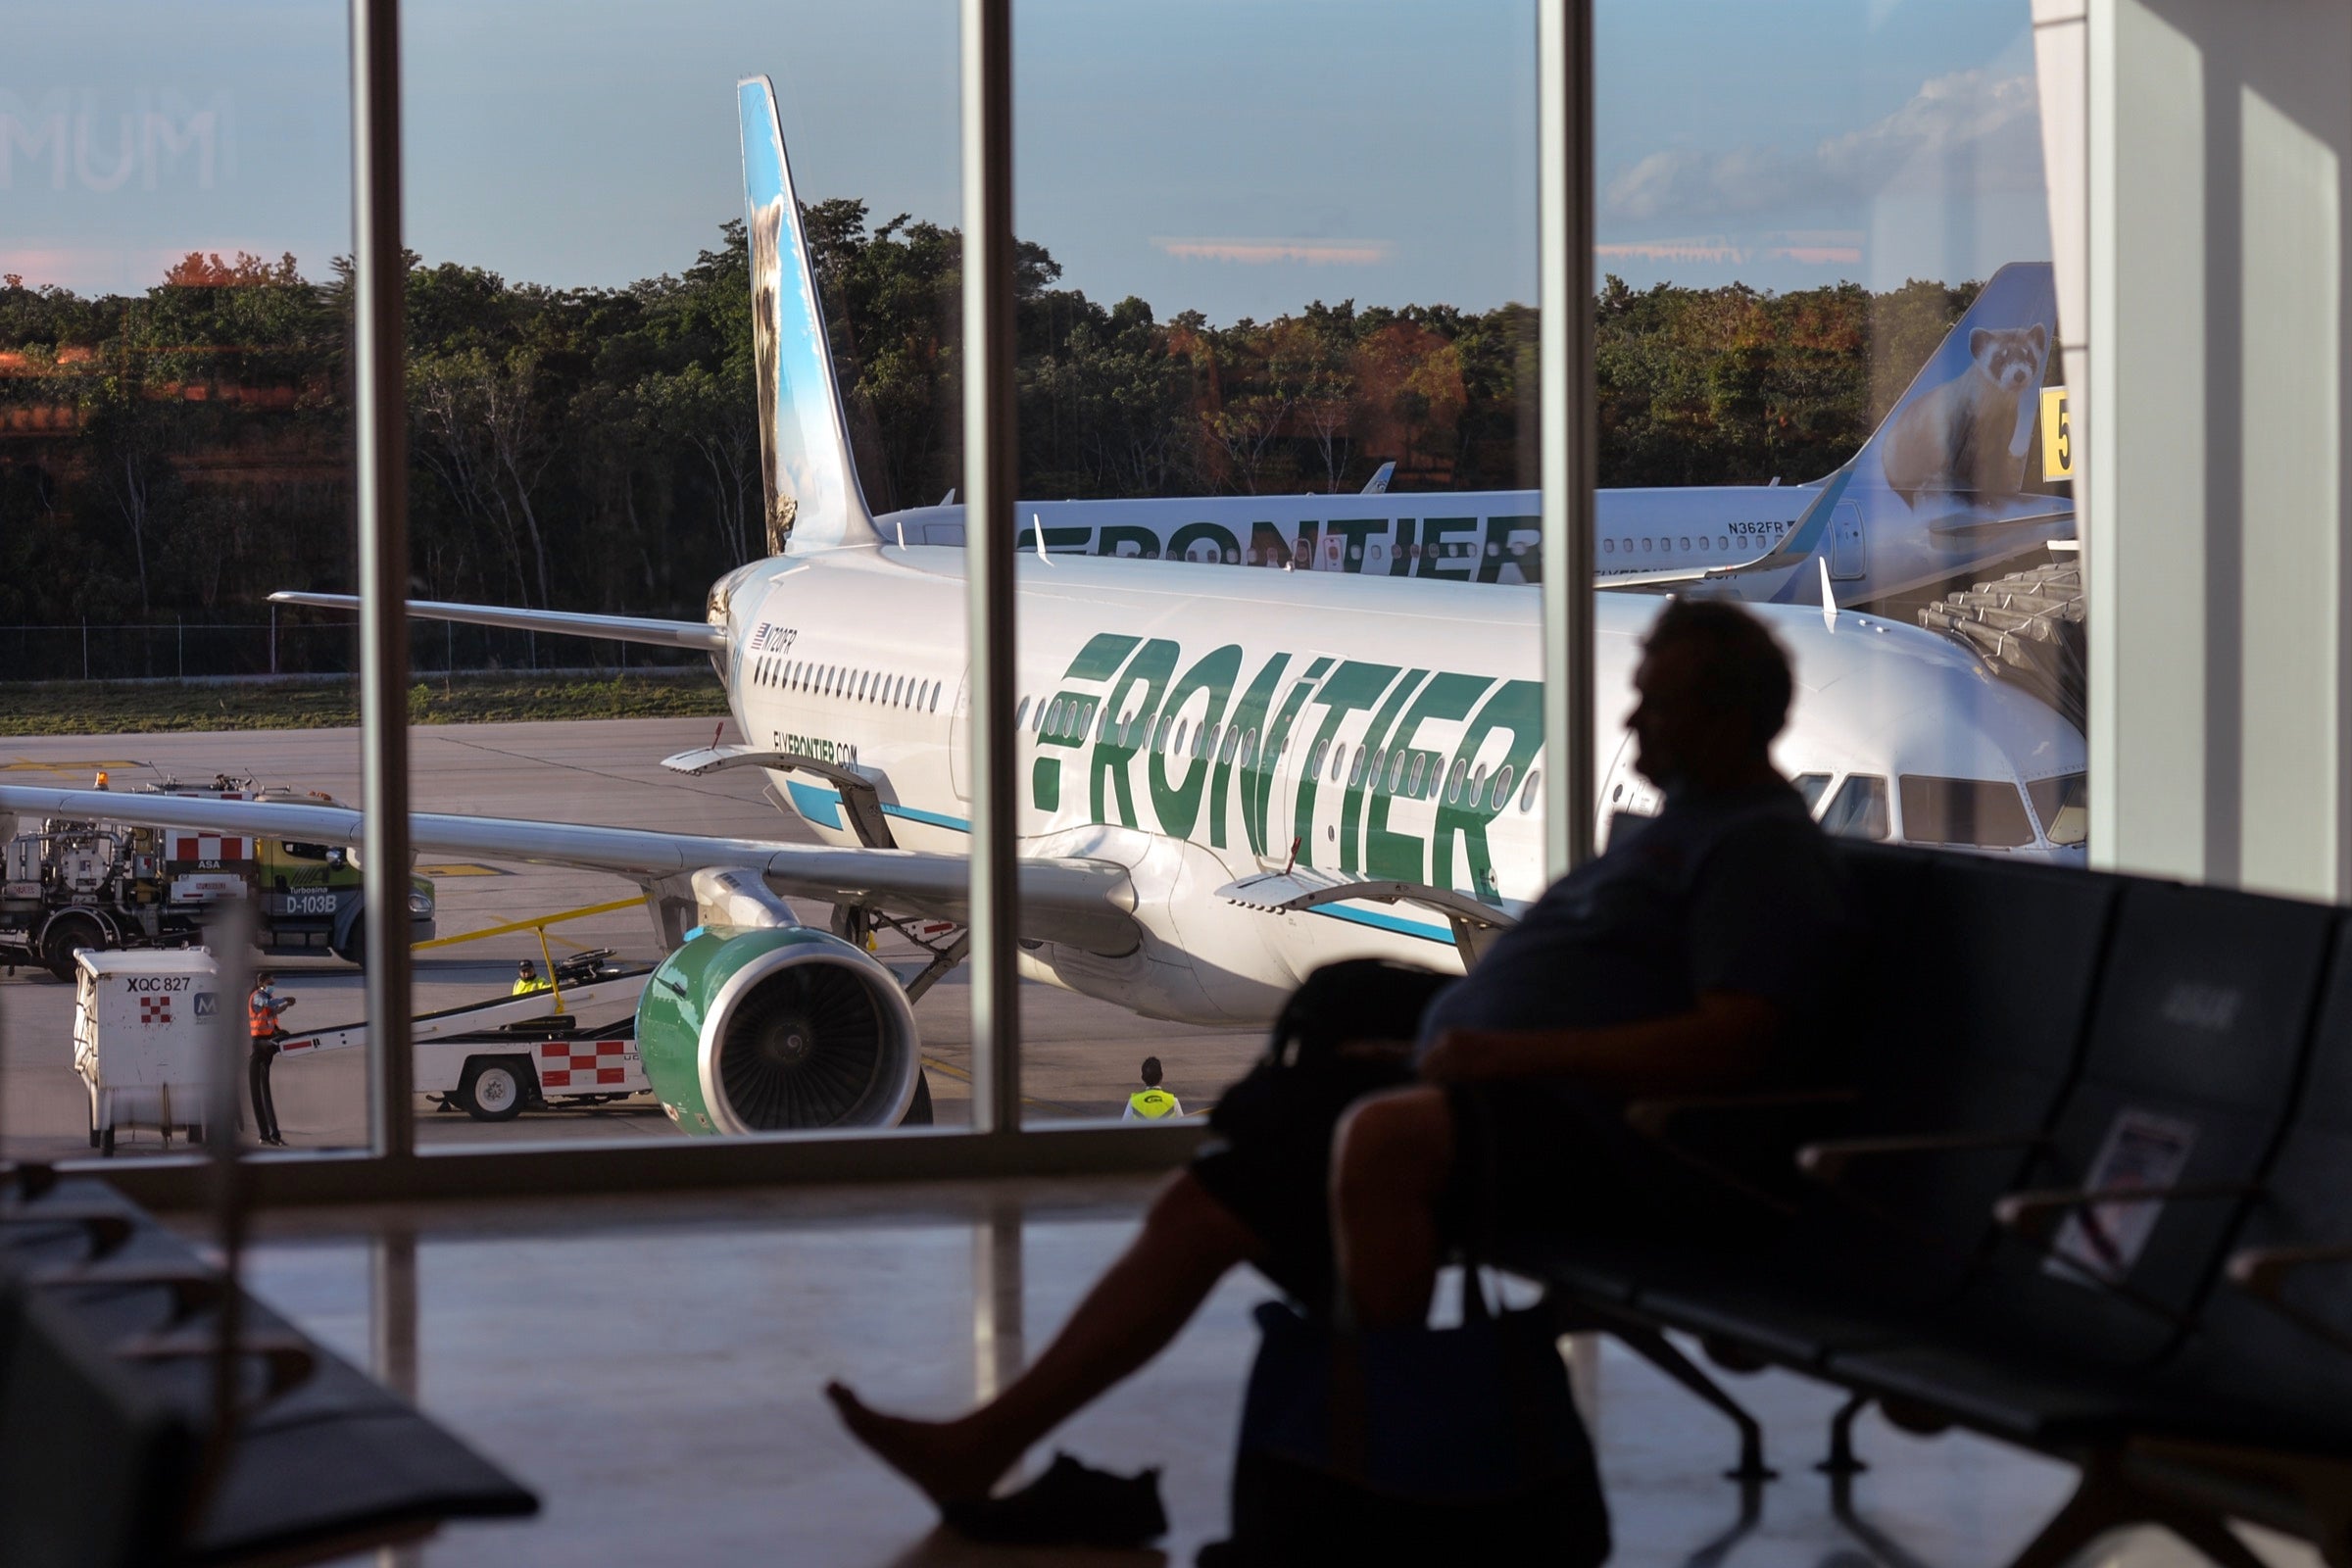 What is Frontier elite status worth in 2022? Frontier Airlines plane at the gate in Cancun